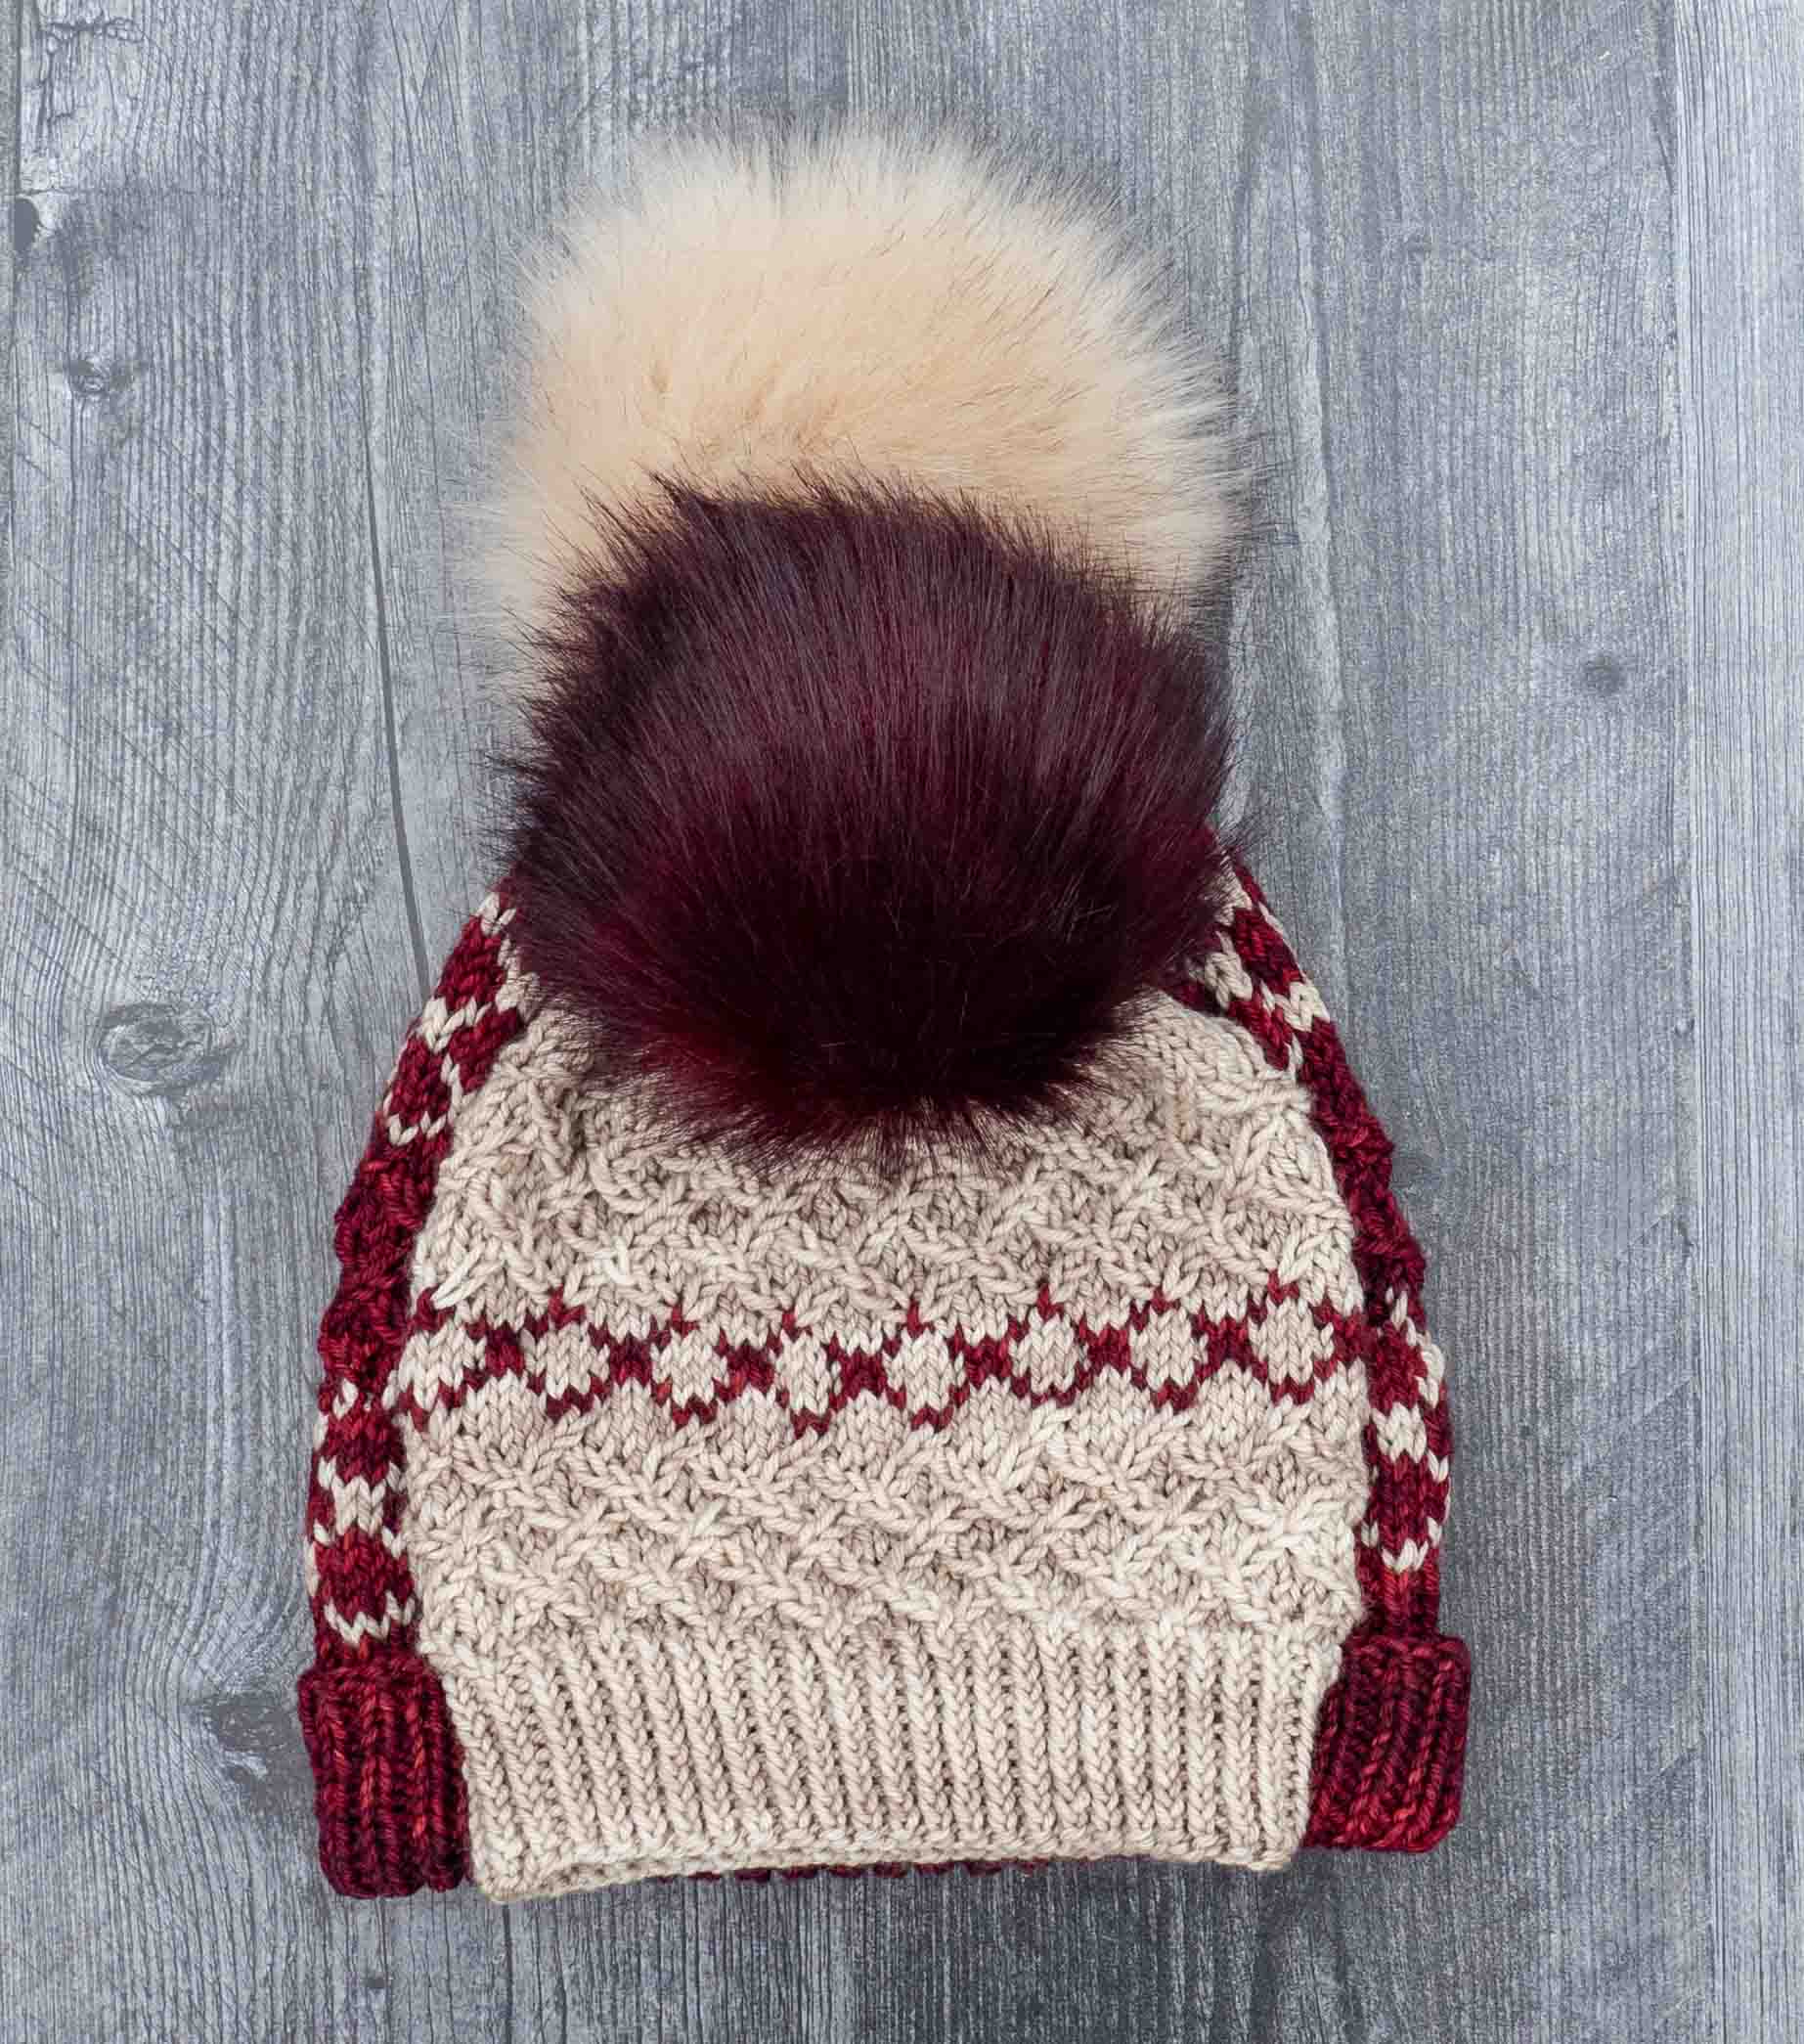 Fair Isle Cabled Hat with pom pom